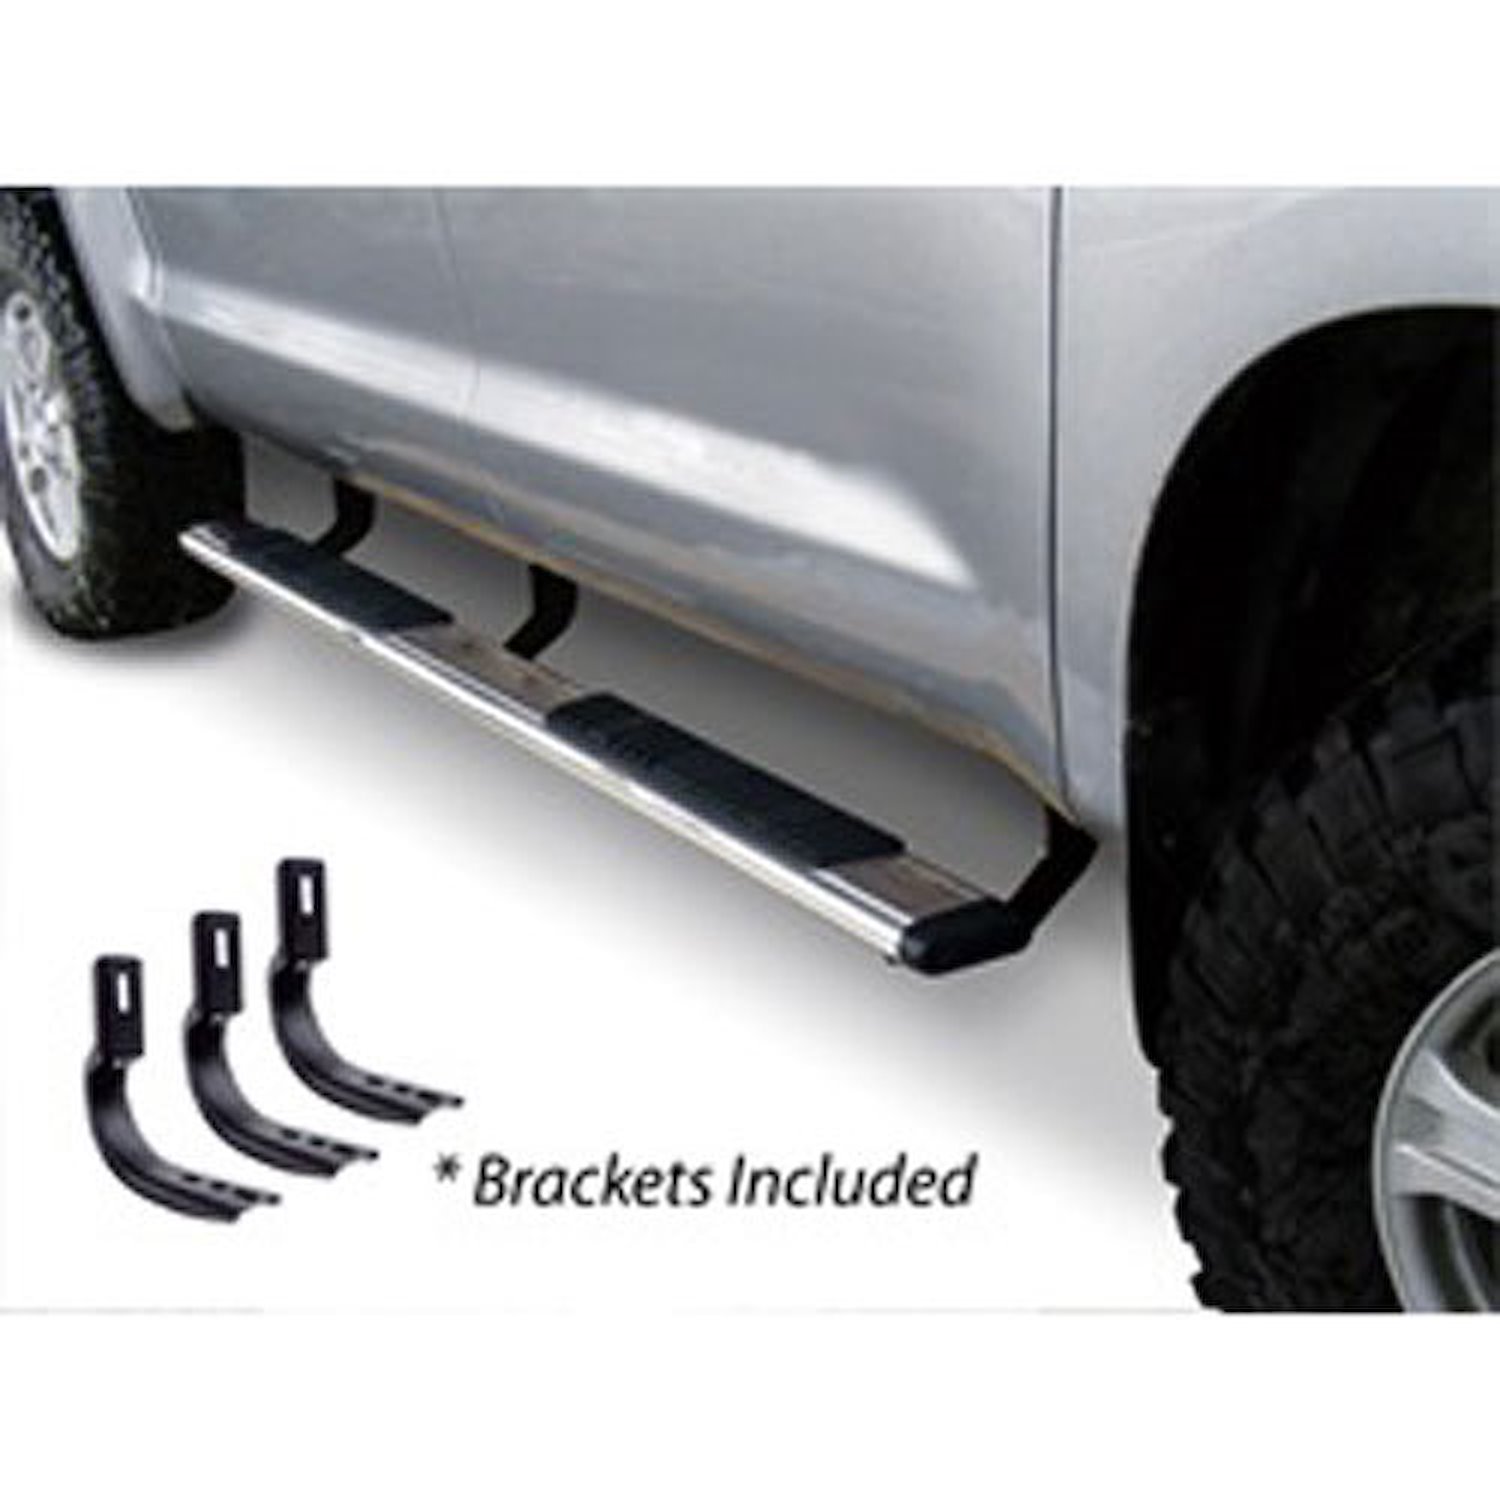 5" OE Xtreme Low Profile SideSteps Kit 2015-16 Ford F-150